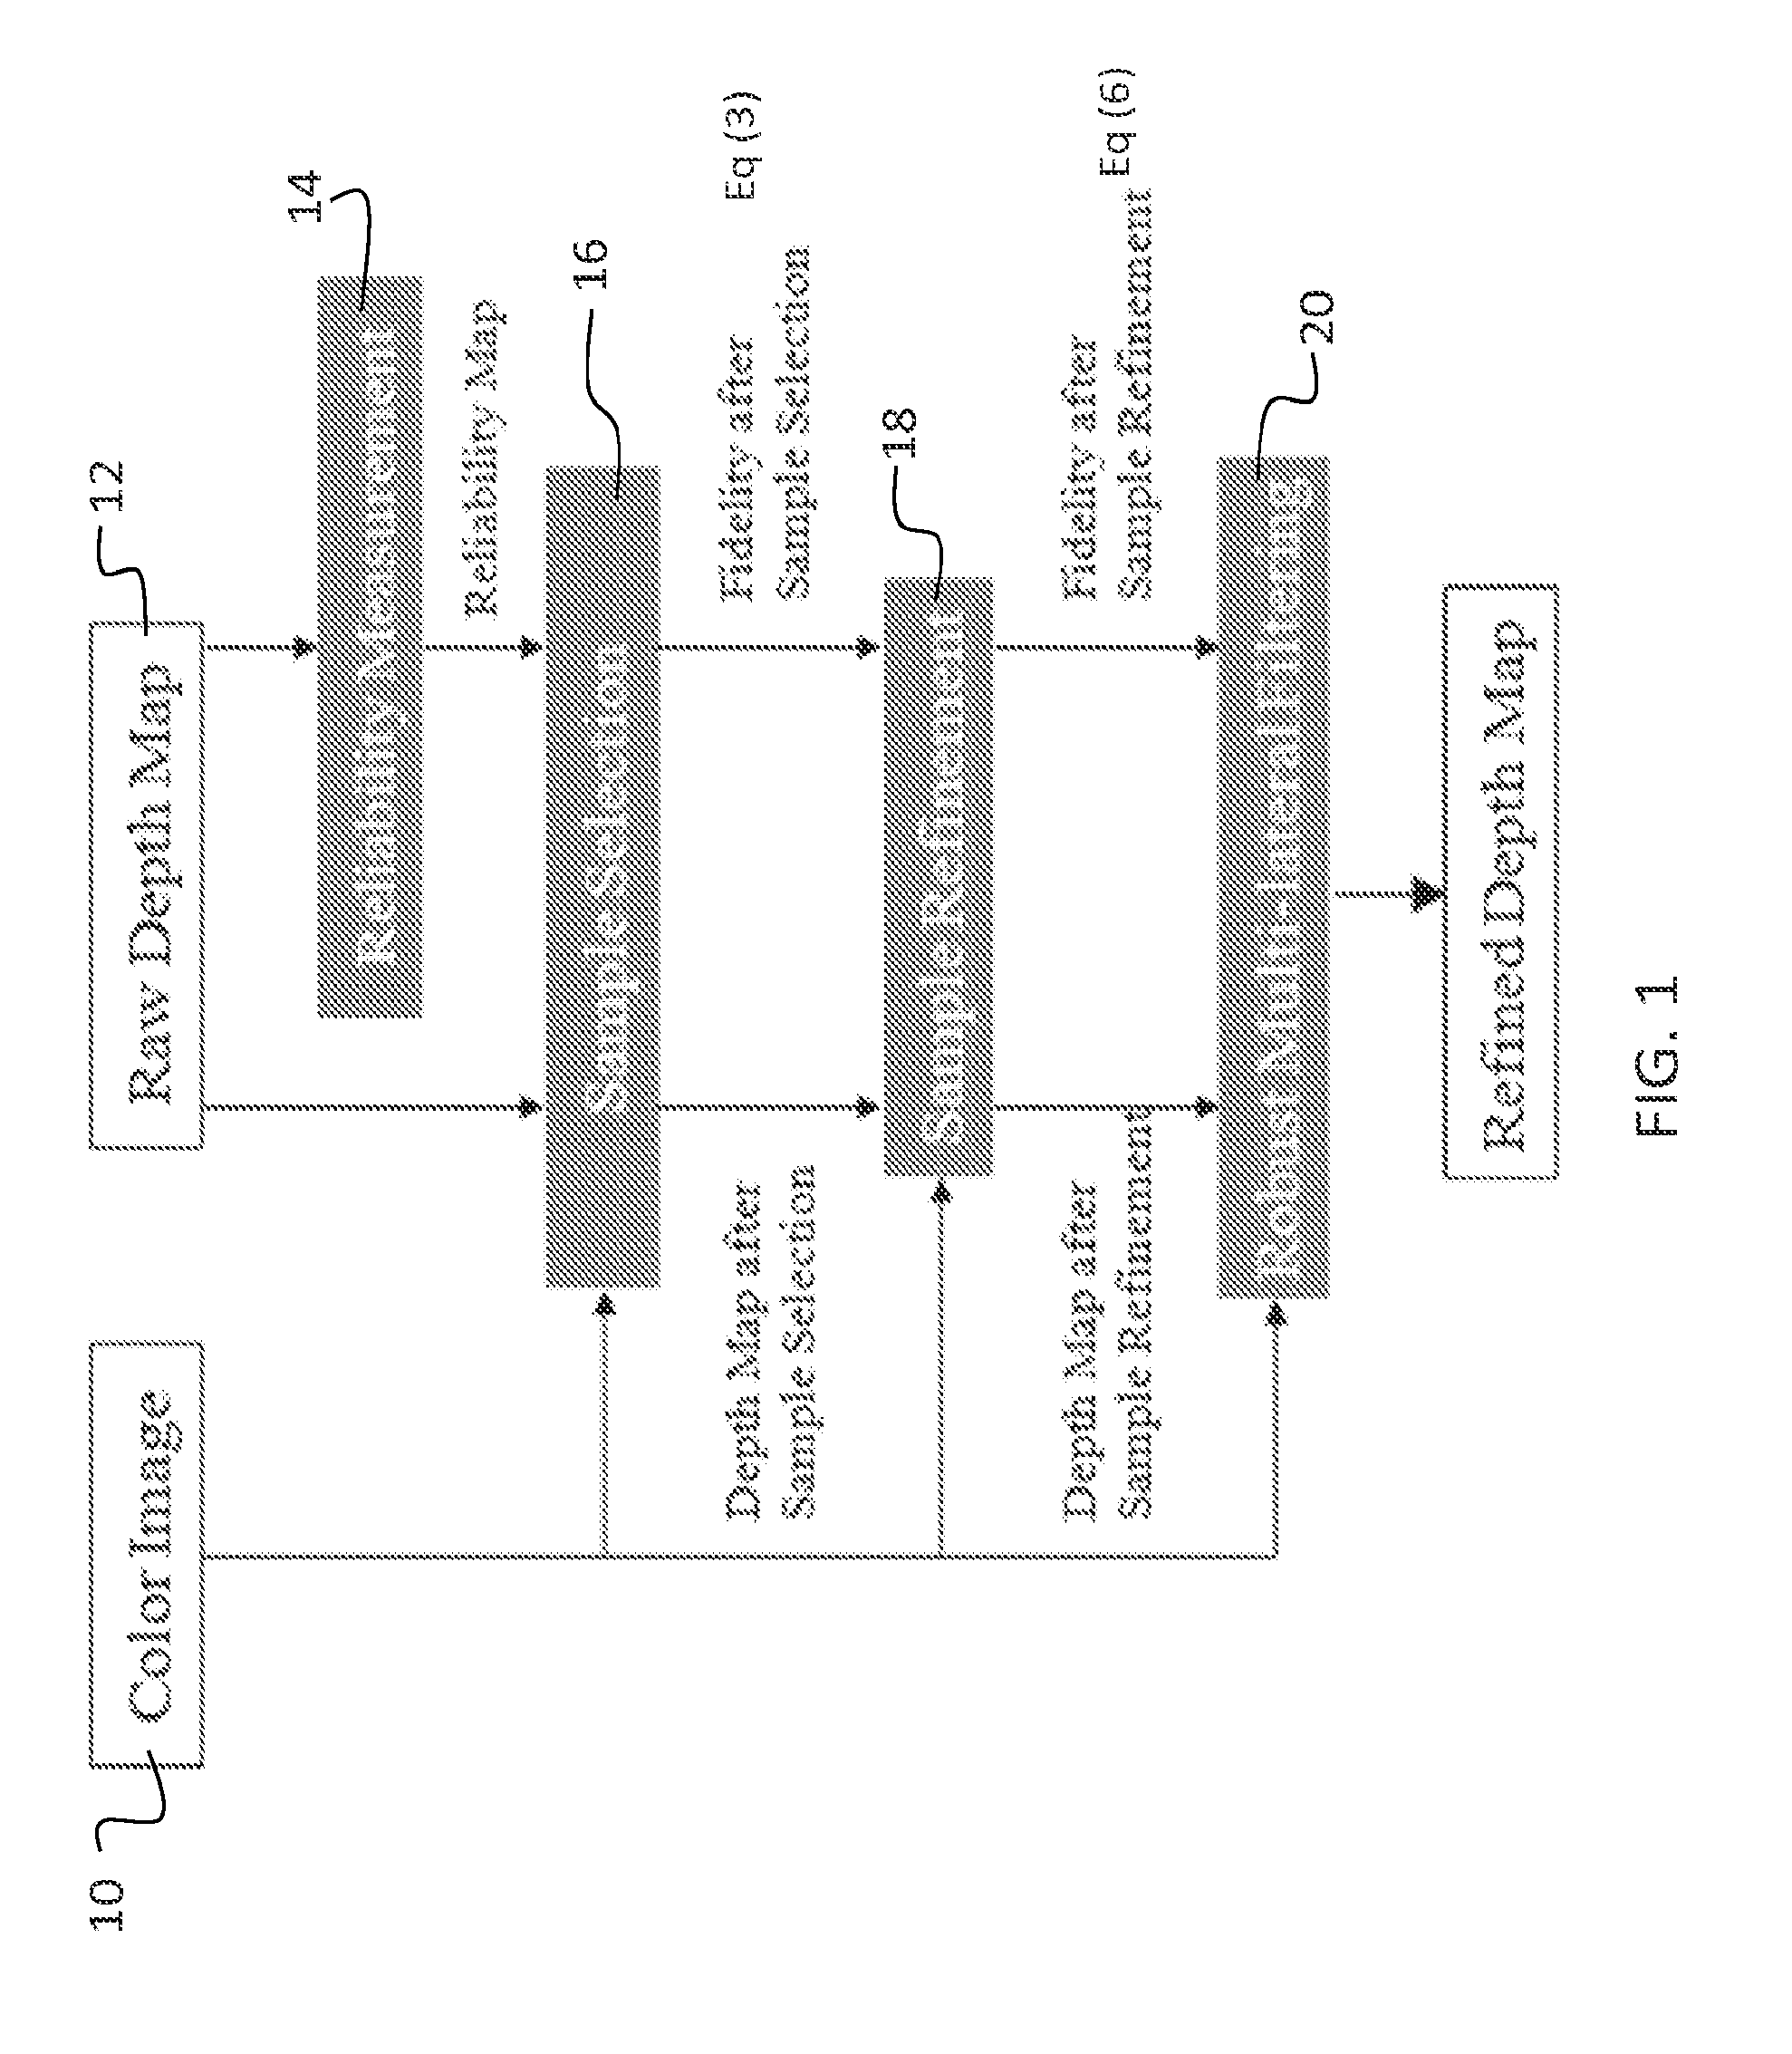 Sampling-based multi-lateral filter method for depth map enhancement and codec